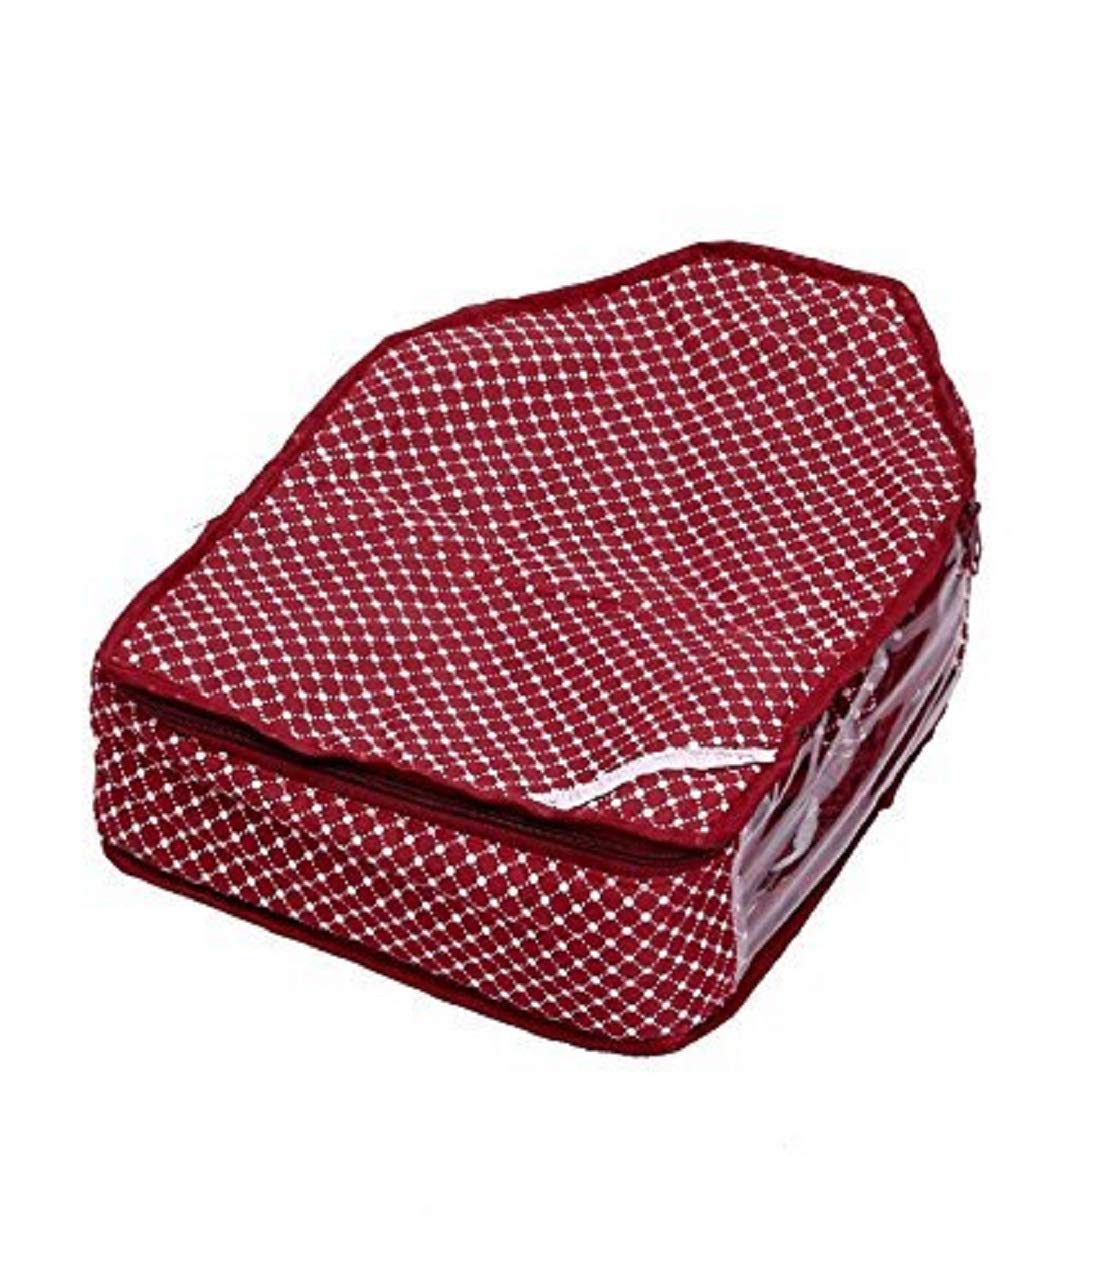 Kuber Industries Cotton Blouse Cover|Polka Dots & Tranparent Side|Zipper Closure|Size 37 x 25 x 23 CM (Maroon)